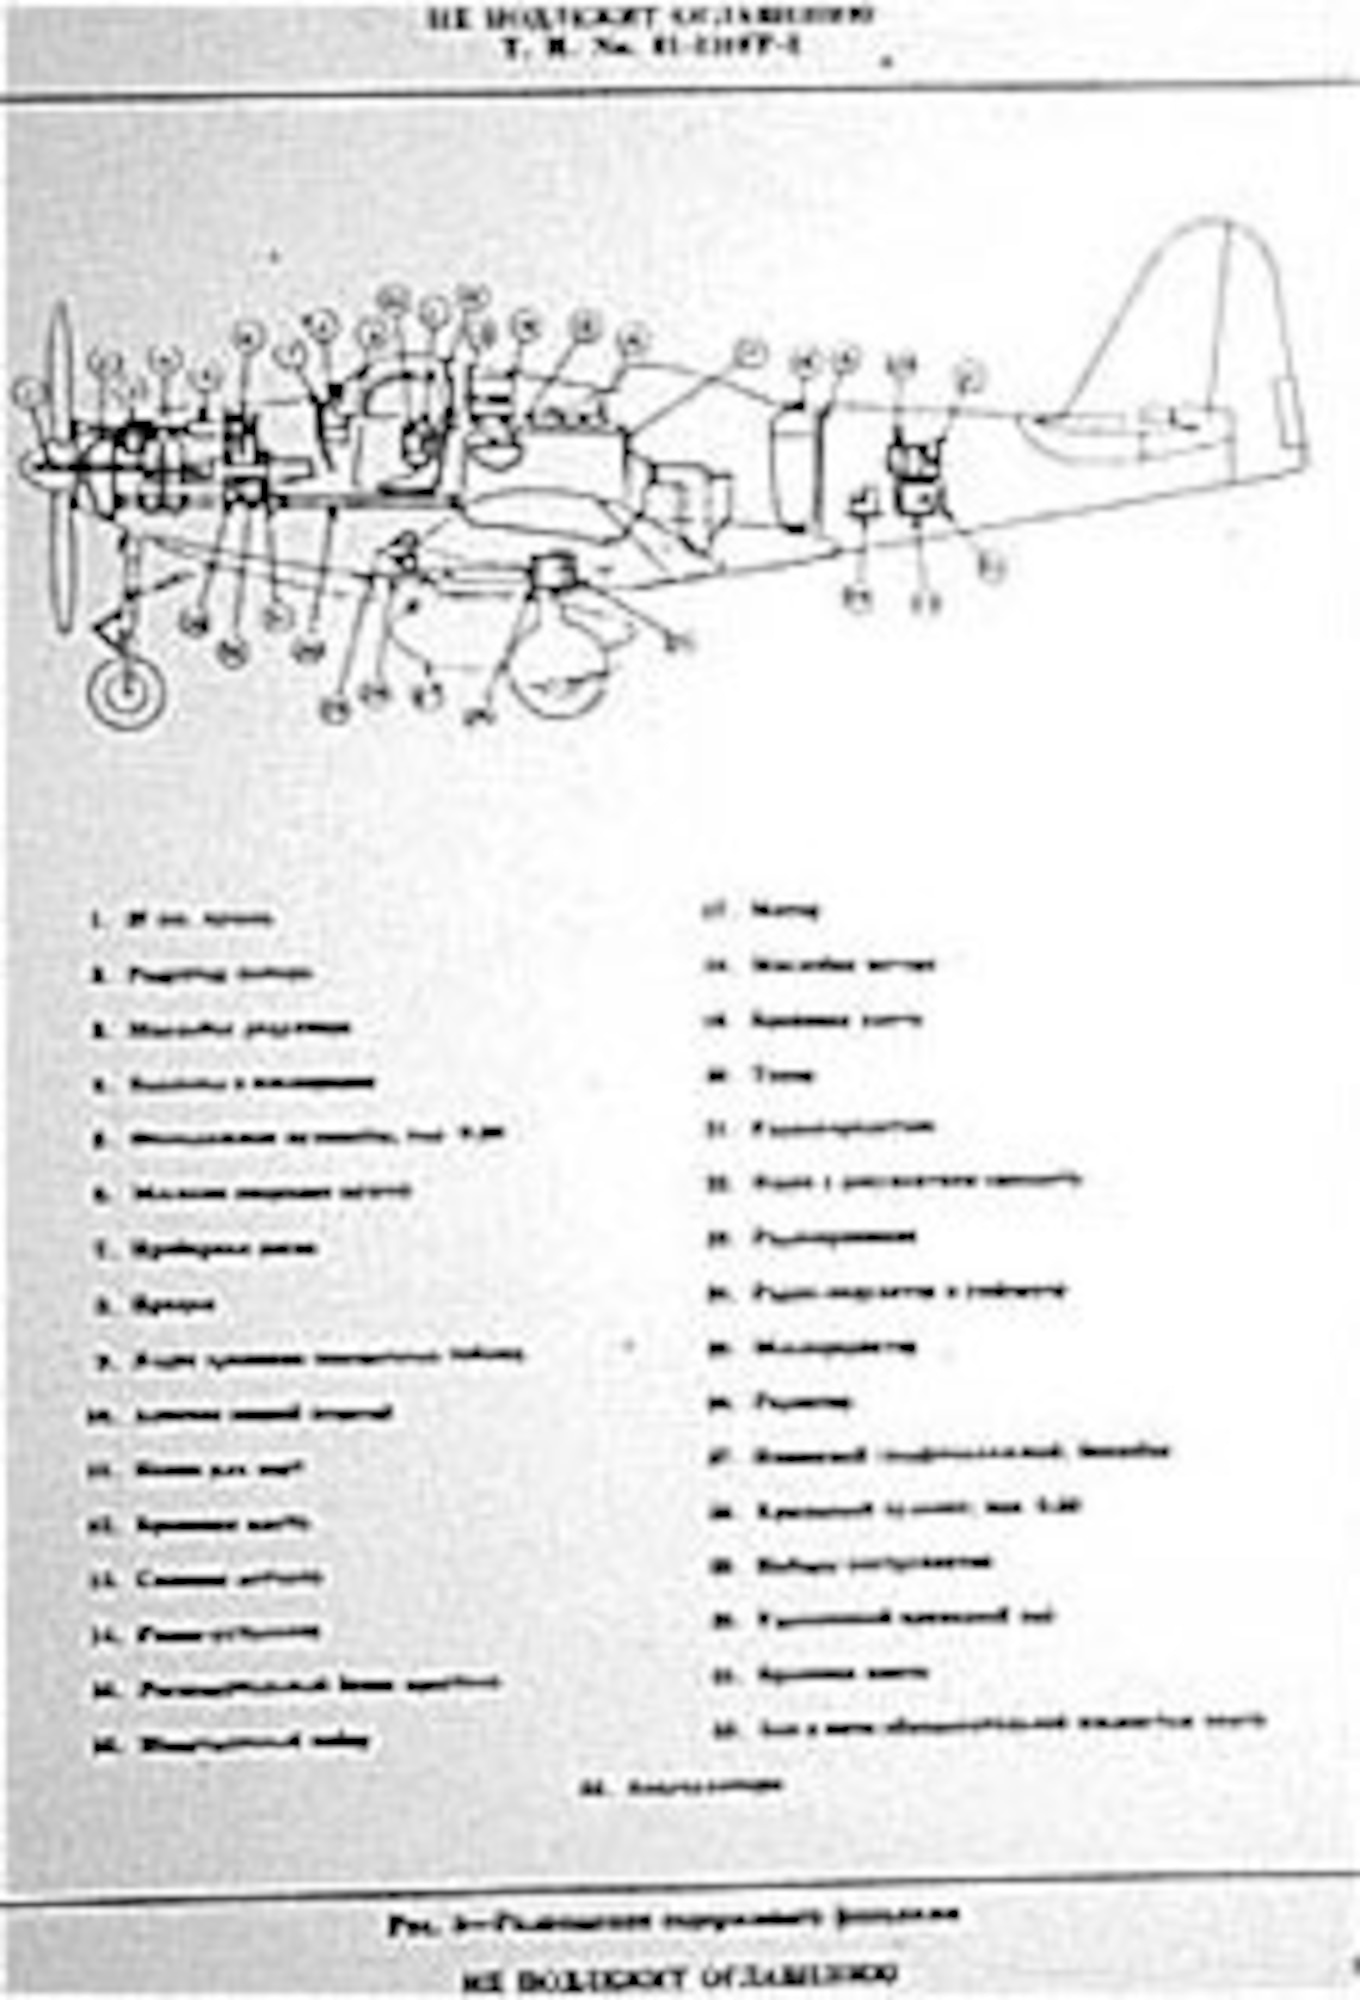 Soviet version of a P-63 flight manual page. (U.S. Air Force photo)